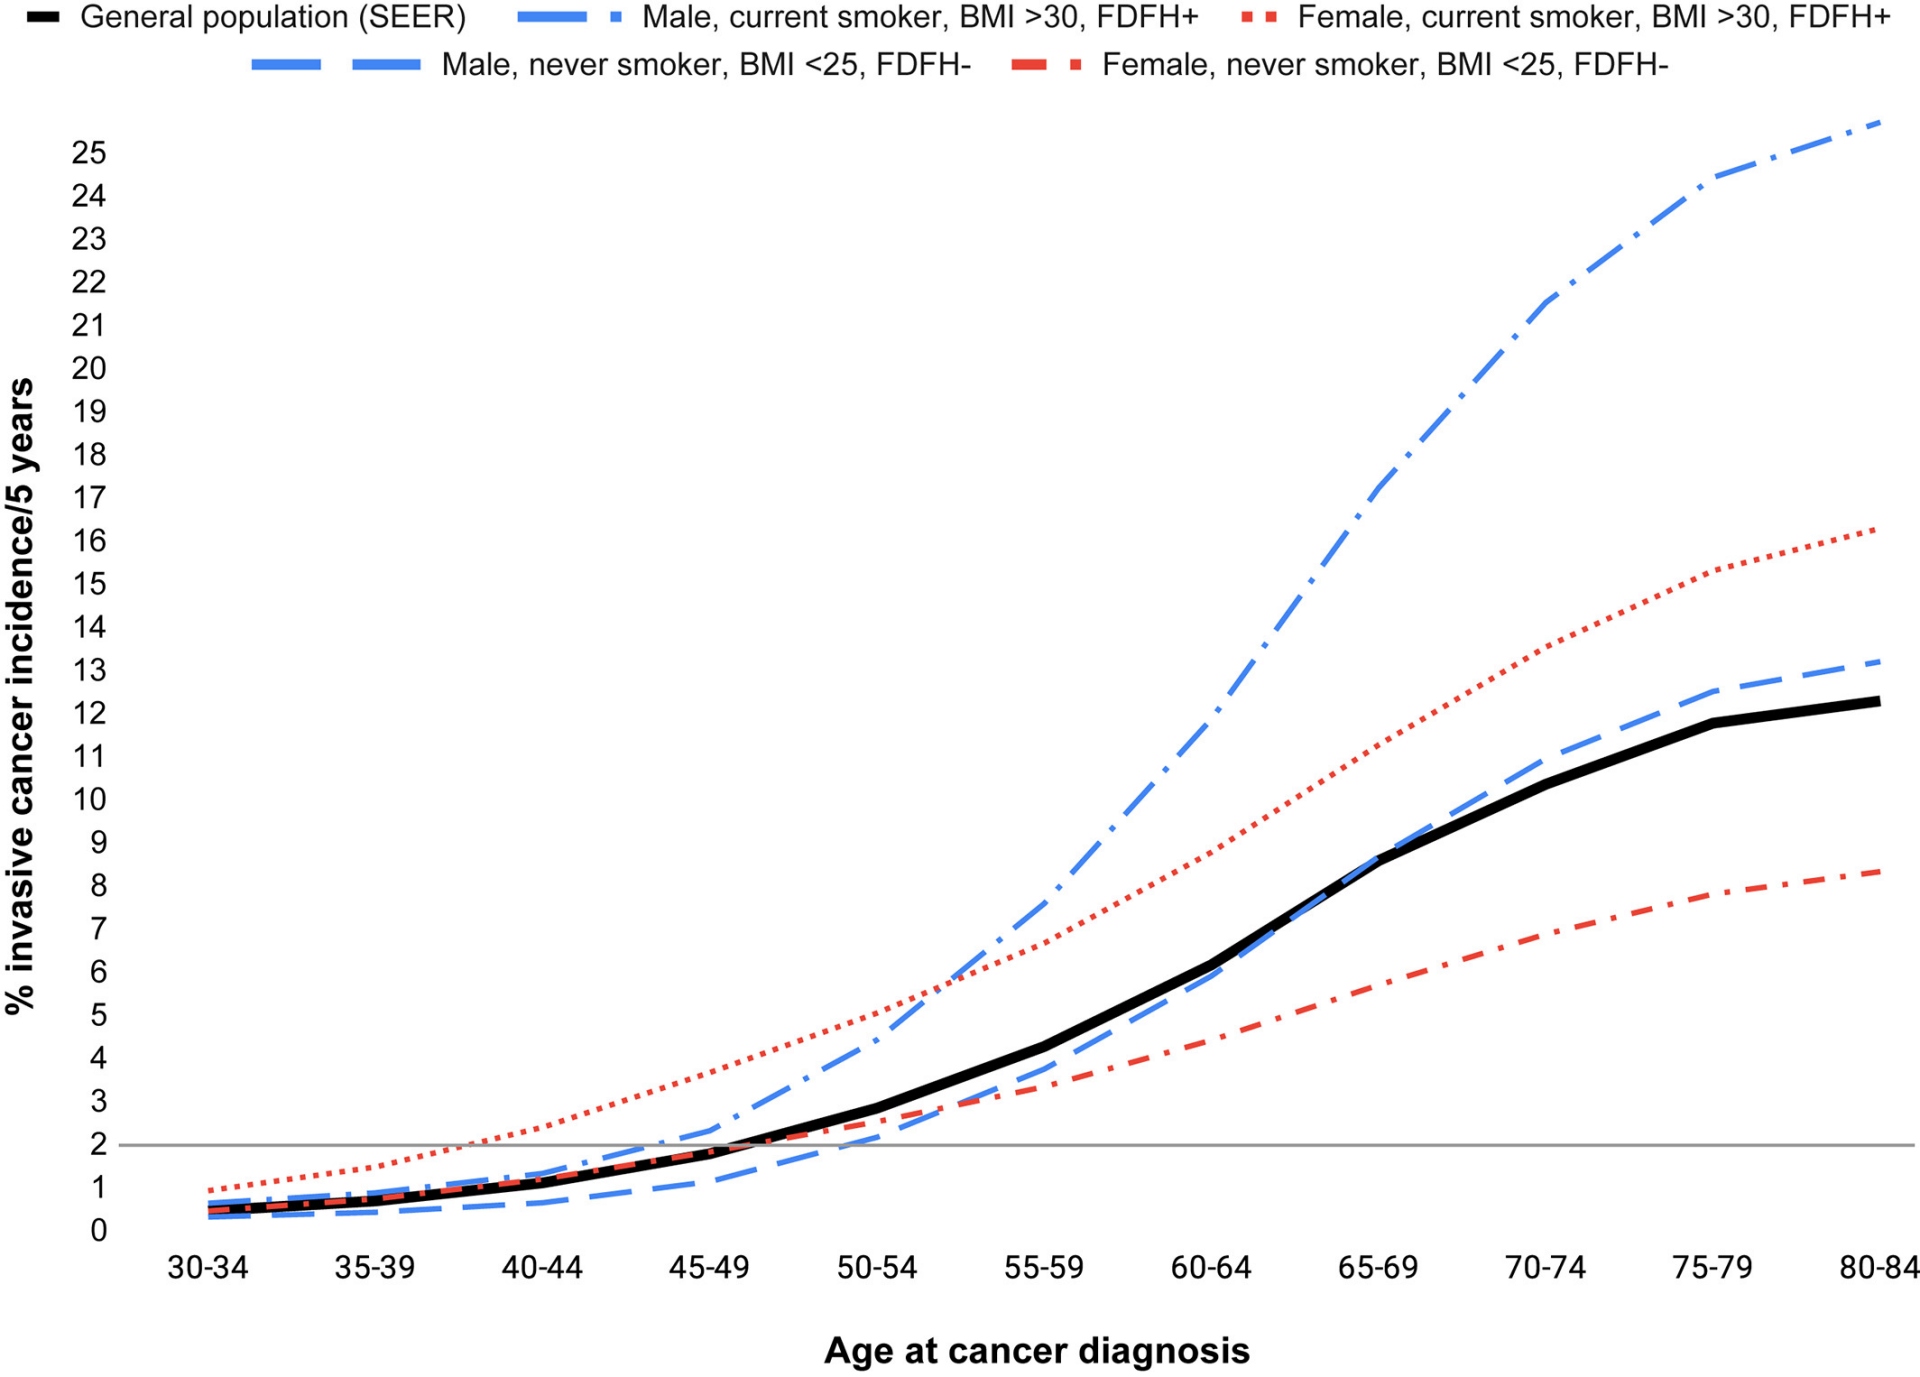 Age-specific Cancer Incidence Curves